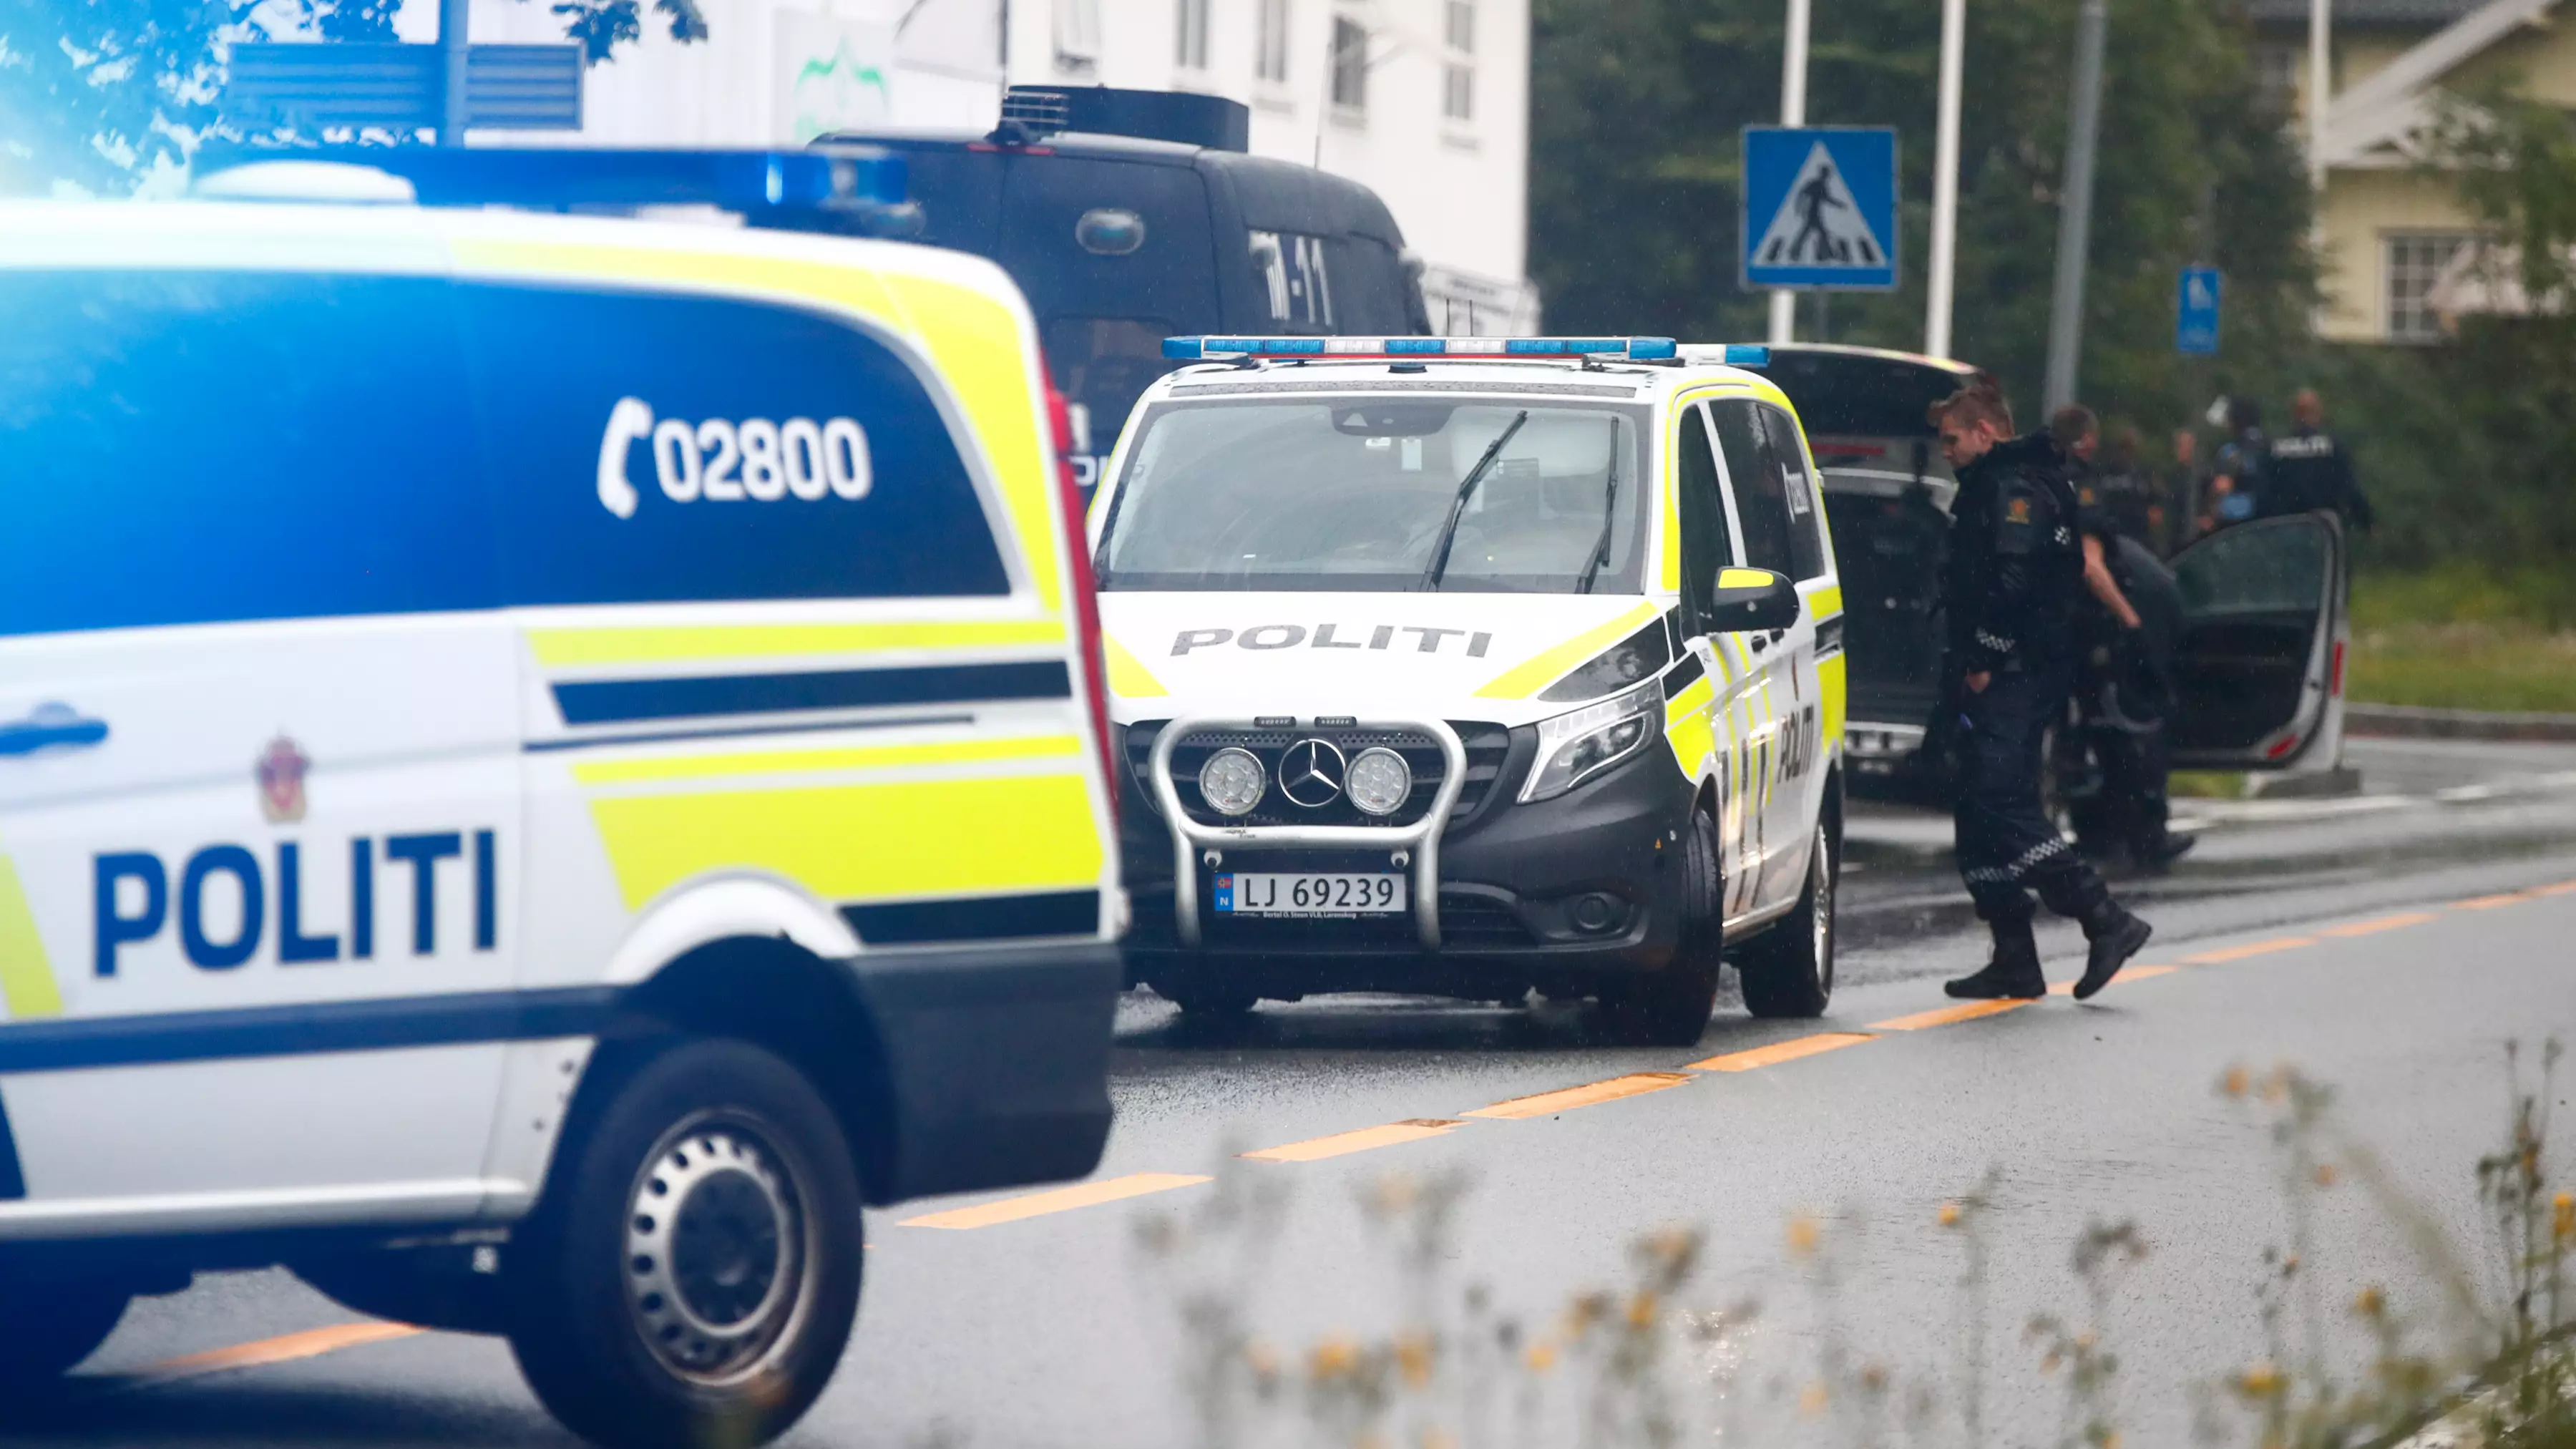 65-Year-Old Man Hailed A Hero After Taking Down Gunman At Mosque In Norway